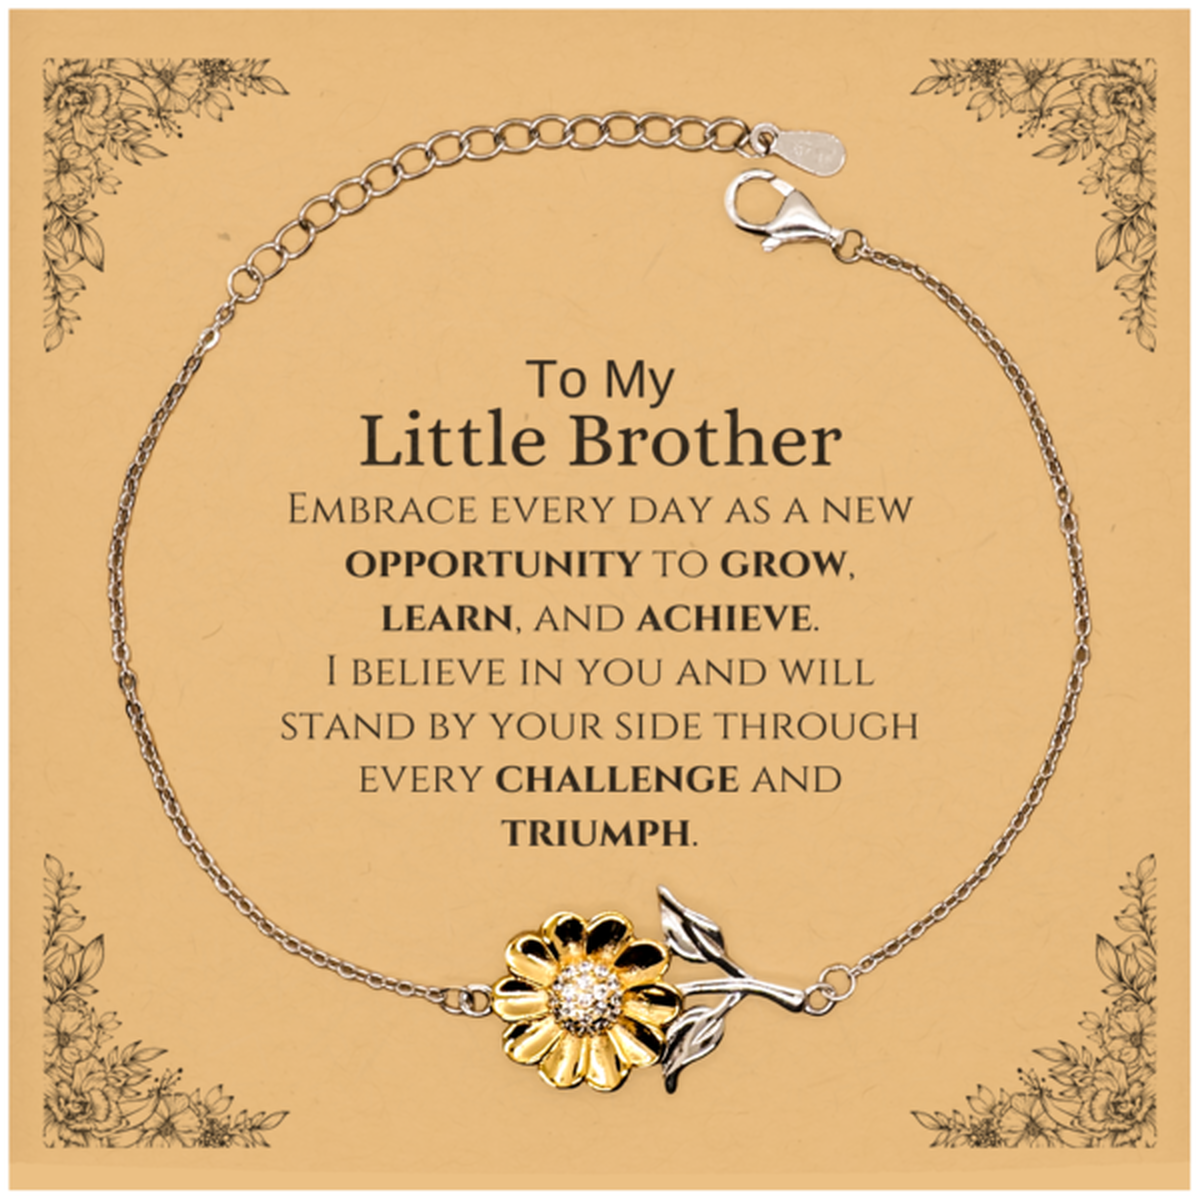 To My Little Brother Gifts, I believe in you and will stand by your side, Inspirational Sunflower Bracelet For Little Brother, Birthday Christmas Motivational Little Brother Gifts